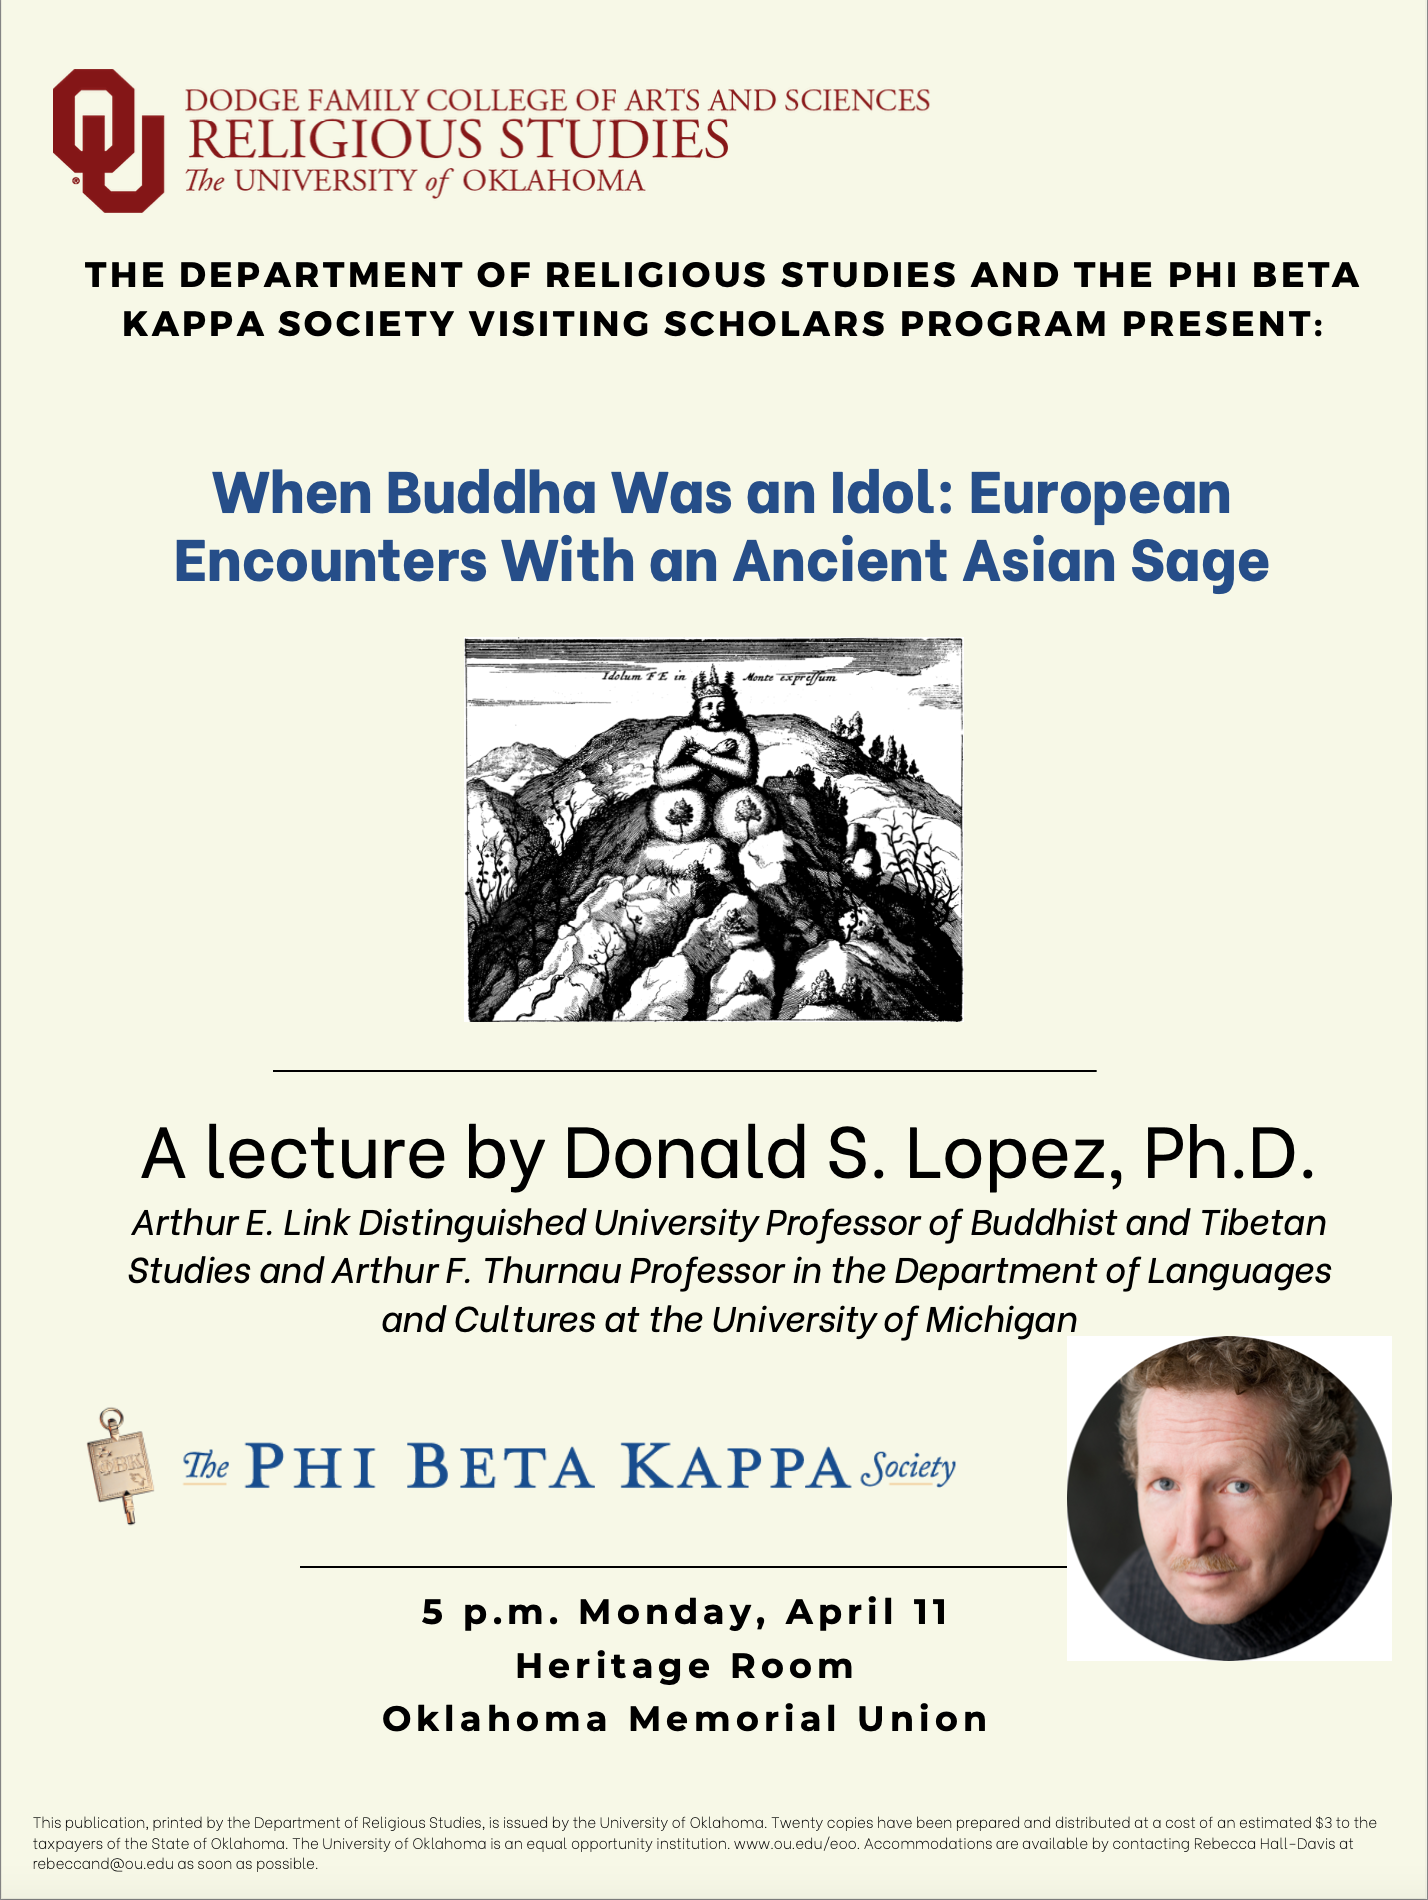 The Department of Religious Studies and the Phi Beta Kappa Society Visiting Scholars Program Present: "When Buddha Was an Idol: European Encounters With an Ancient Asian Sage," A Lecture by Donald S. Lopez, Ph.D., Arthur E. Link Distinguished University Professor of Buddhist and Tibetan Studies and Arthur F. Thurnau Professor in the Department of Languages and Cultures at the University of Michigan, The Phi Beta Kappa Society, 5 p.m. Monday, April 11, Heritage Room, Oklahoma Memorial Union